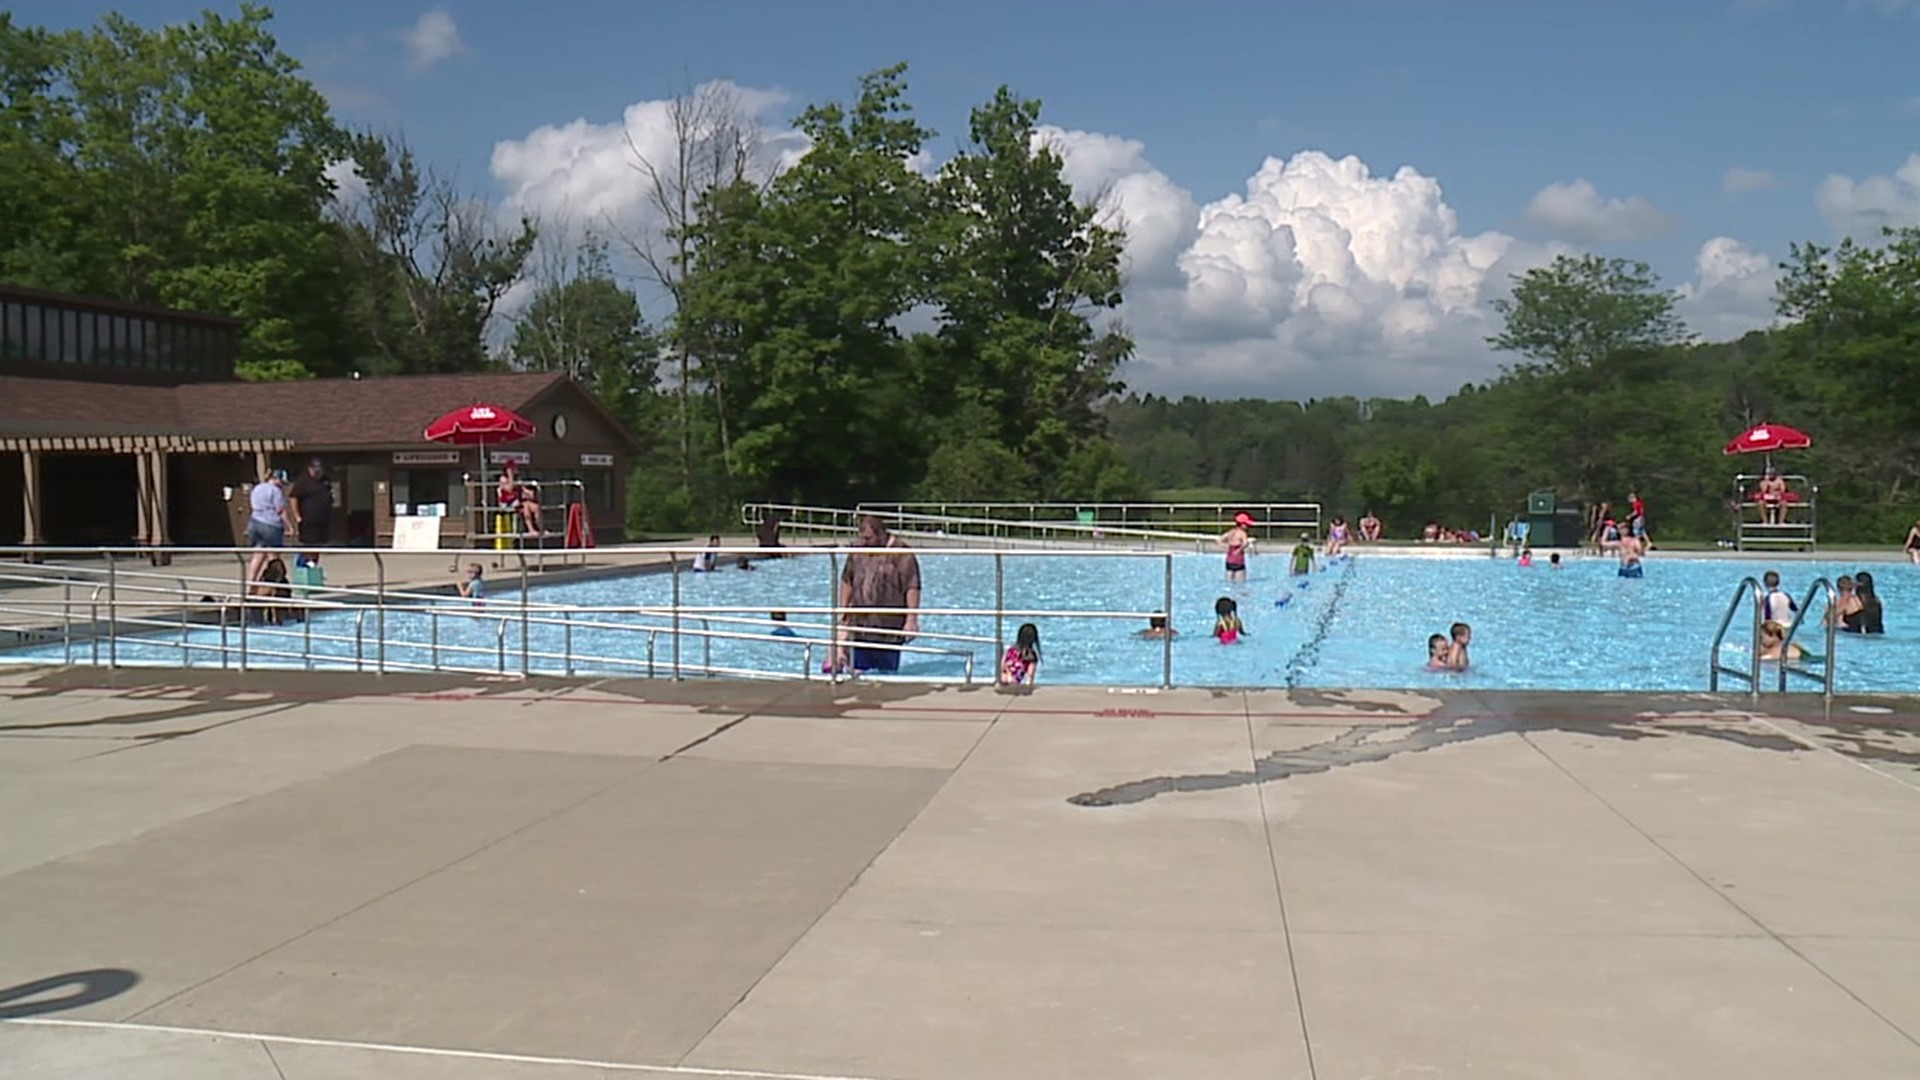 DCNR officials say the liner of the swimming pool needs to be replaced.